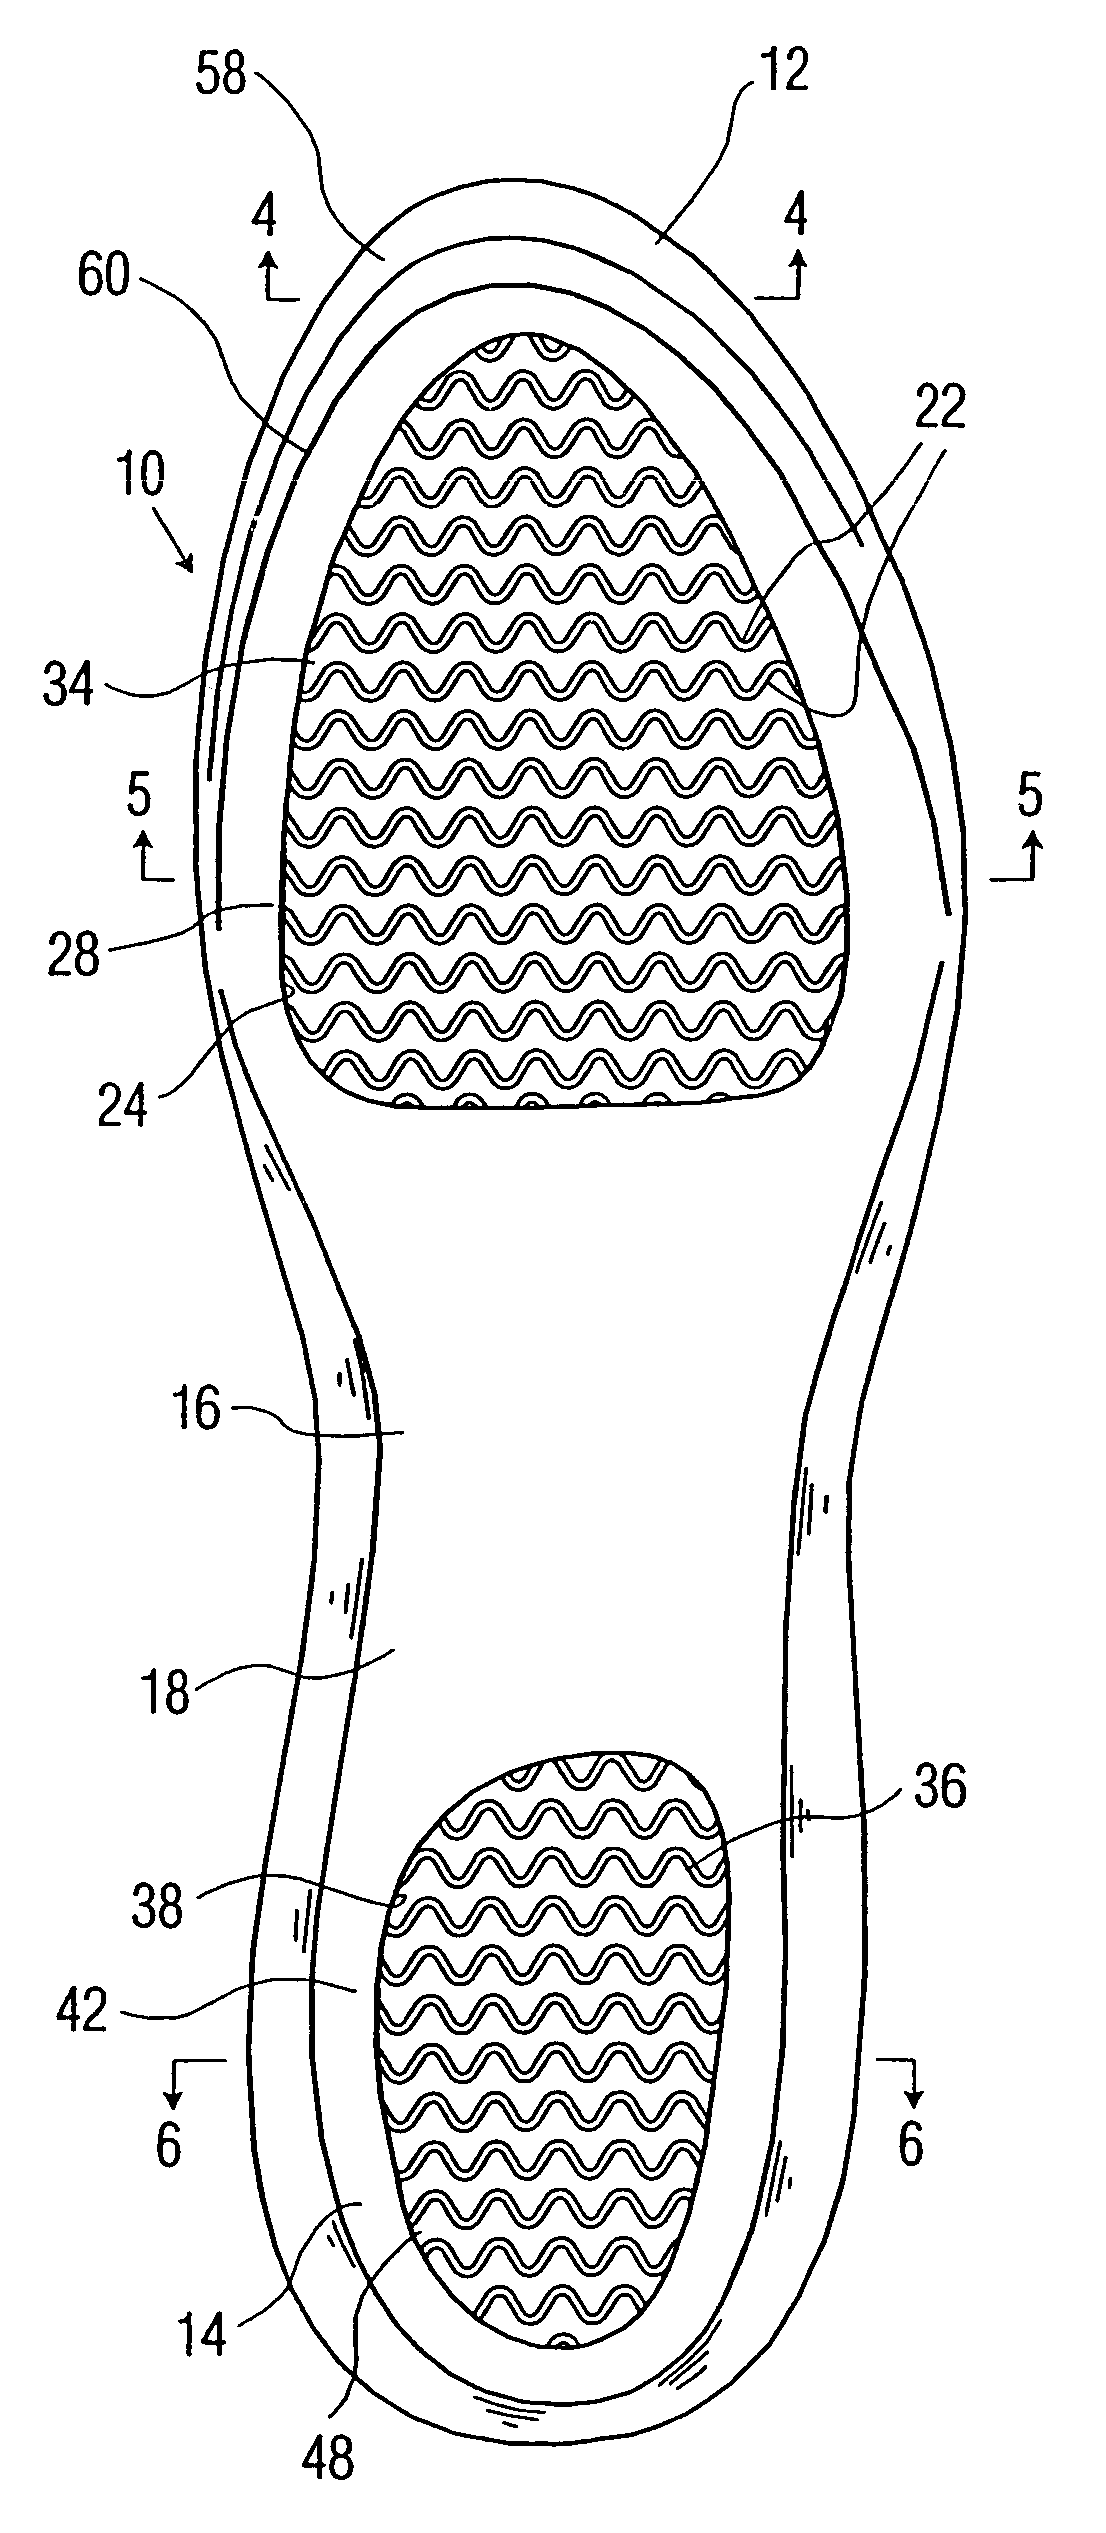 Gel insoles with lower heel and toe recesses having thin spring walls